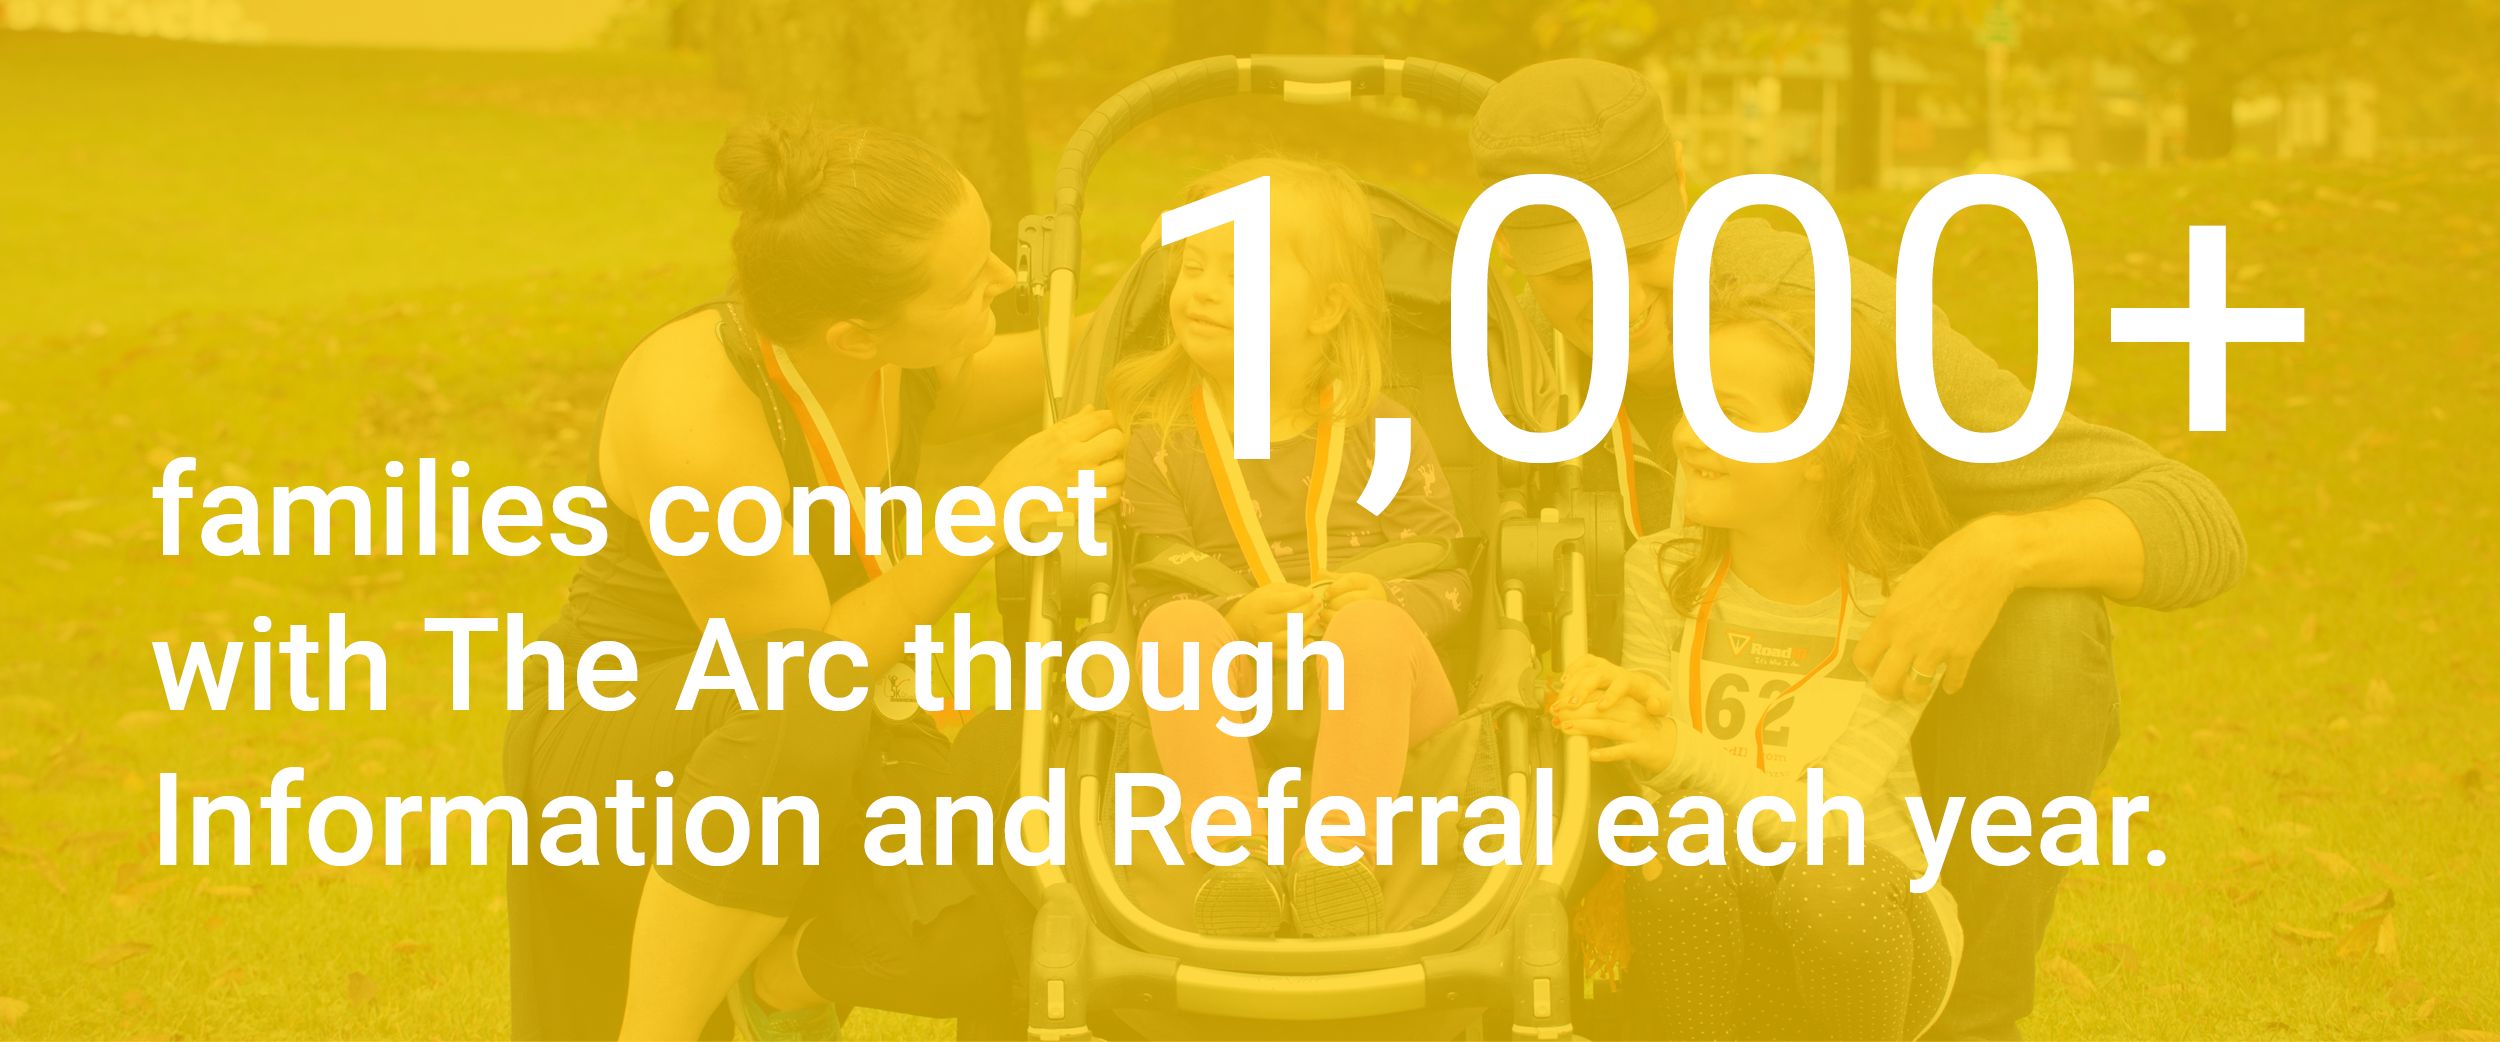 1,000-plus families connect with The Arc through Information and Referral each year.